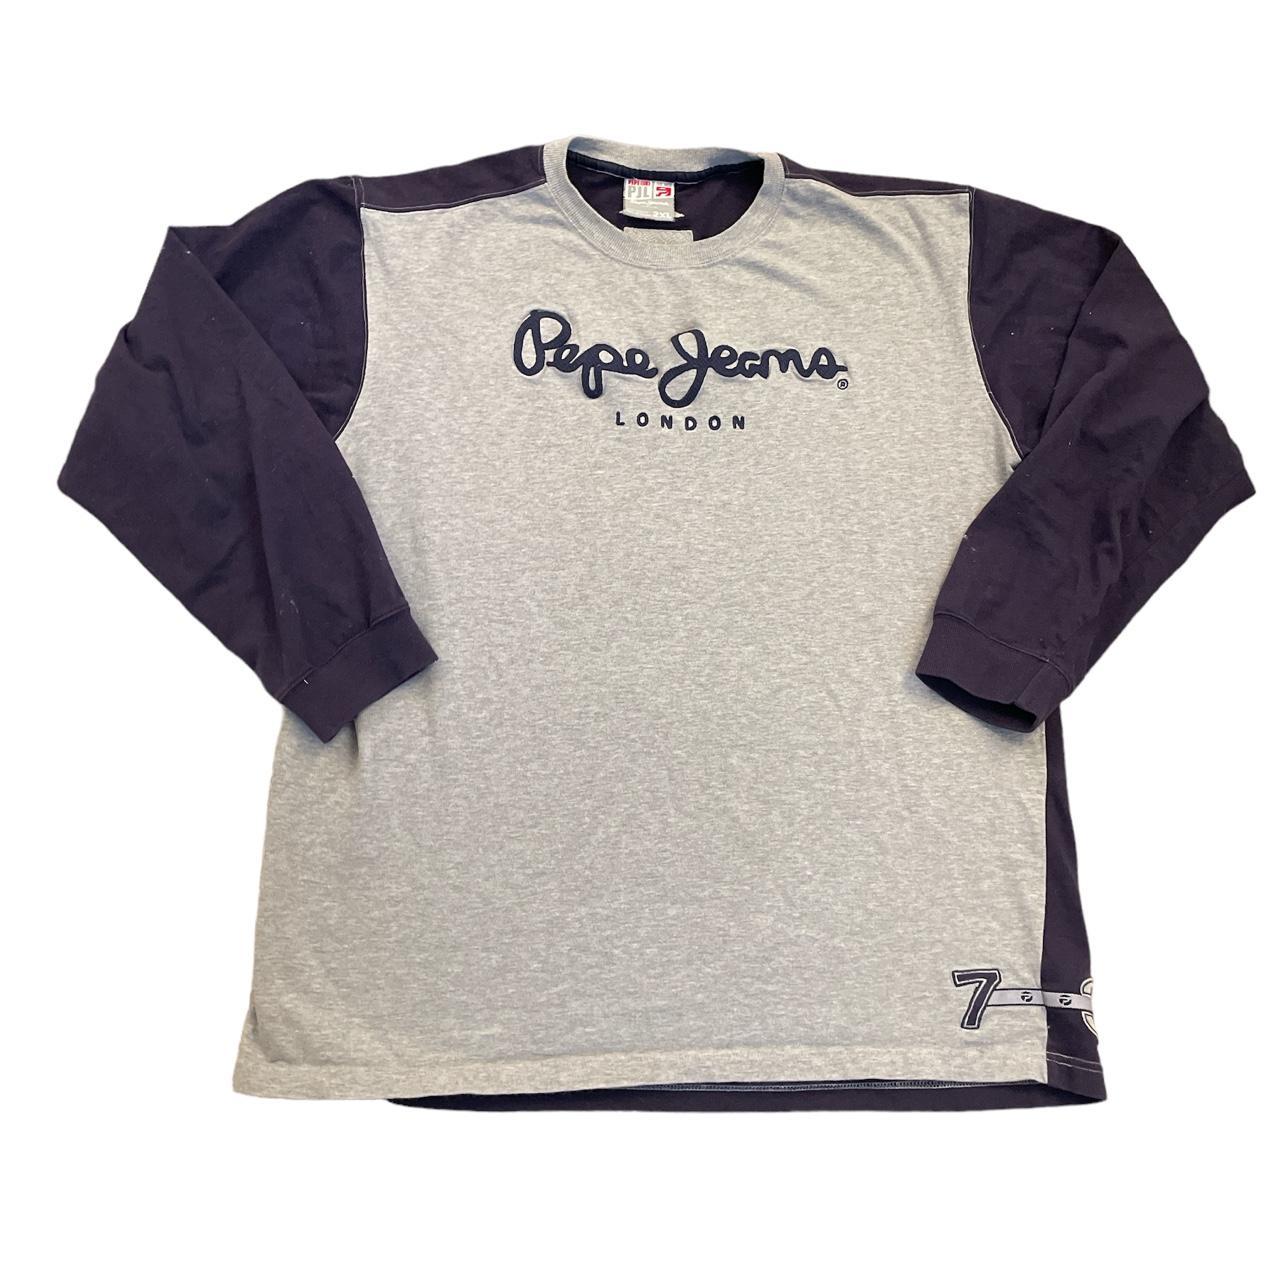 Pepe Jeans Men's Navy and Grey T-shirt